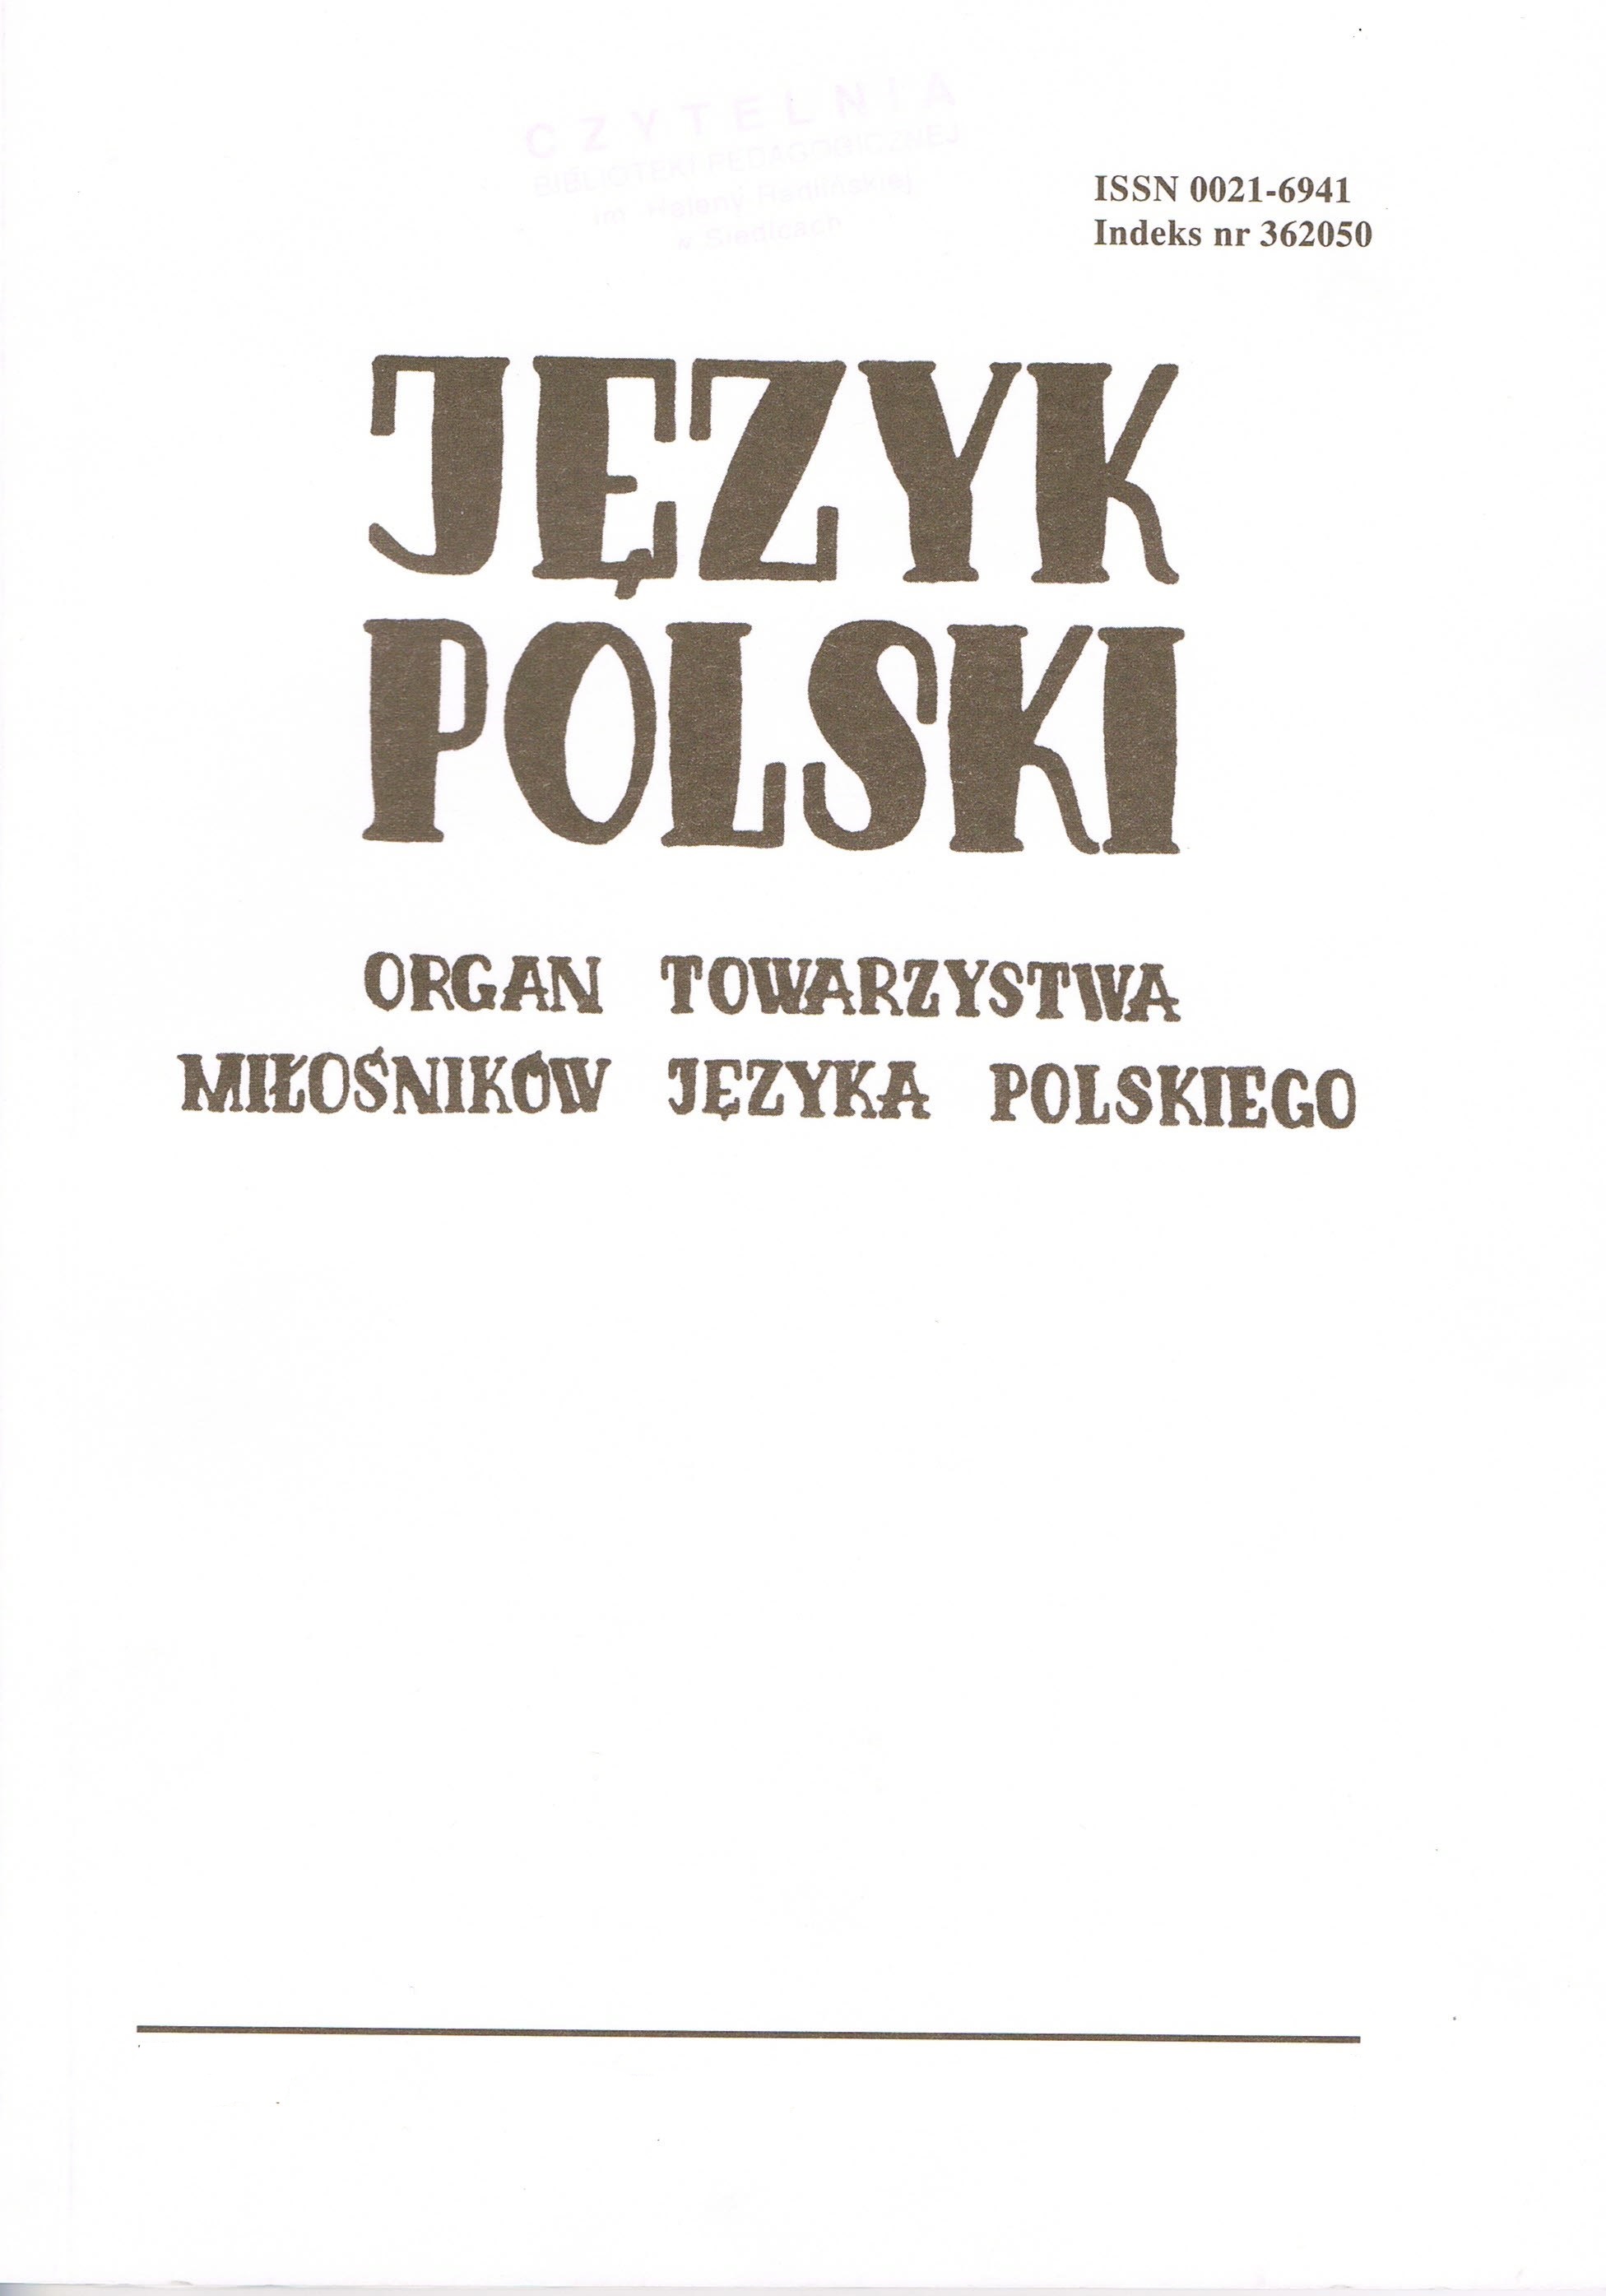 On a certain type of small advertisements placed in the Przewodnik Katolicki weekly in the 1930s Cover Image